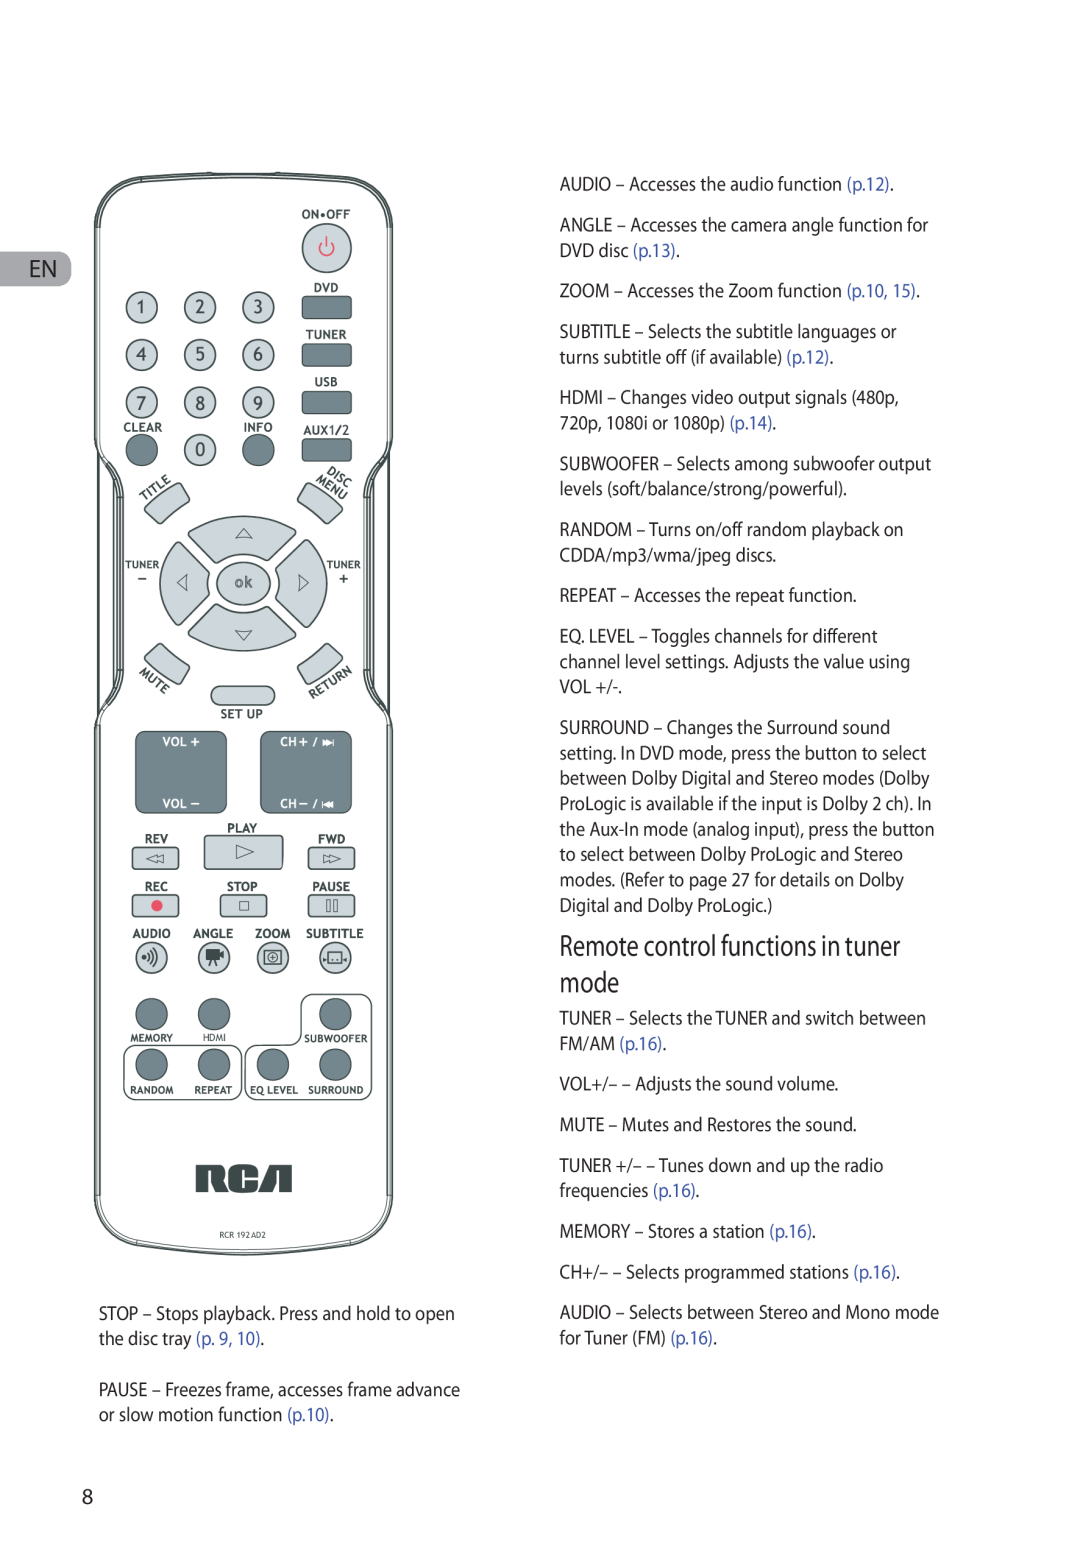 RCA RTD317 user manual Remote control functions in tuner mode 